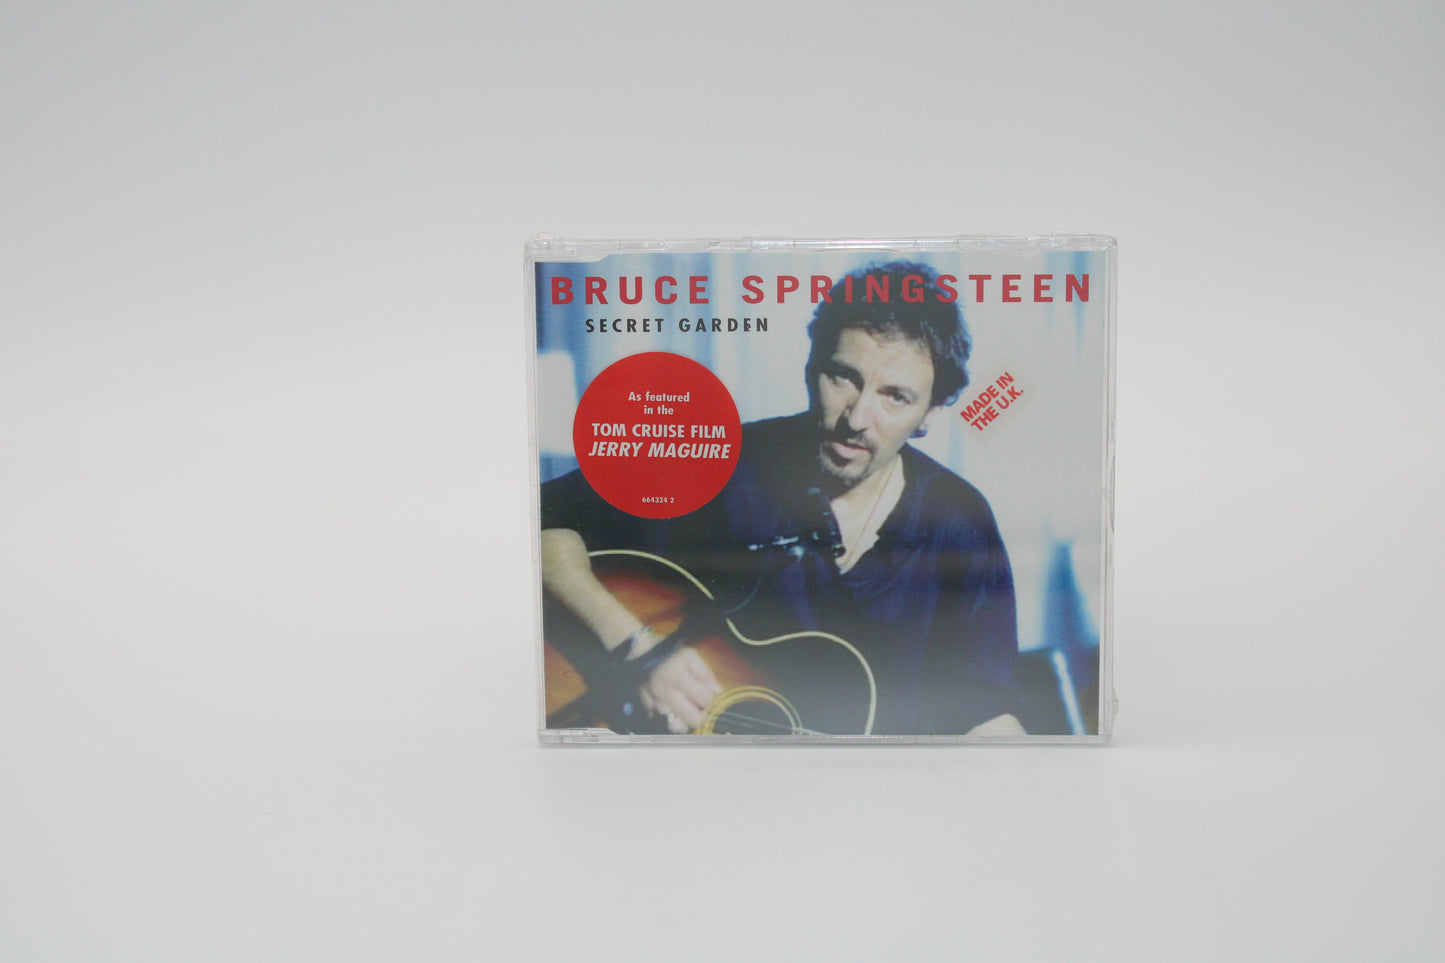 Bruce Springsteen Secret Garden 4 song CD/EP Sealed Import with Hype Sticker Collectible